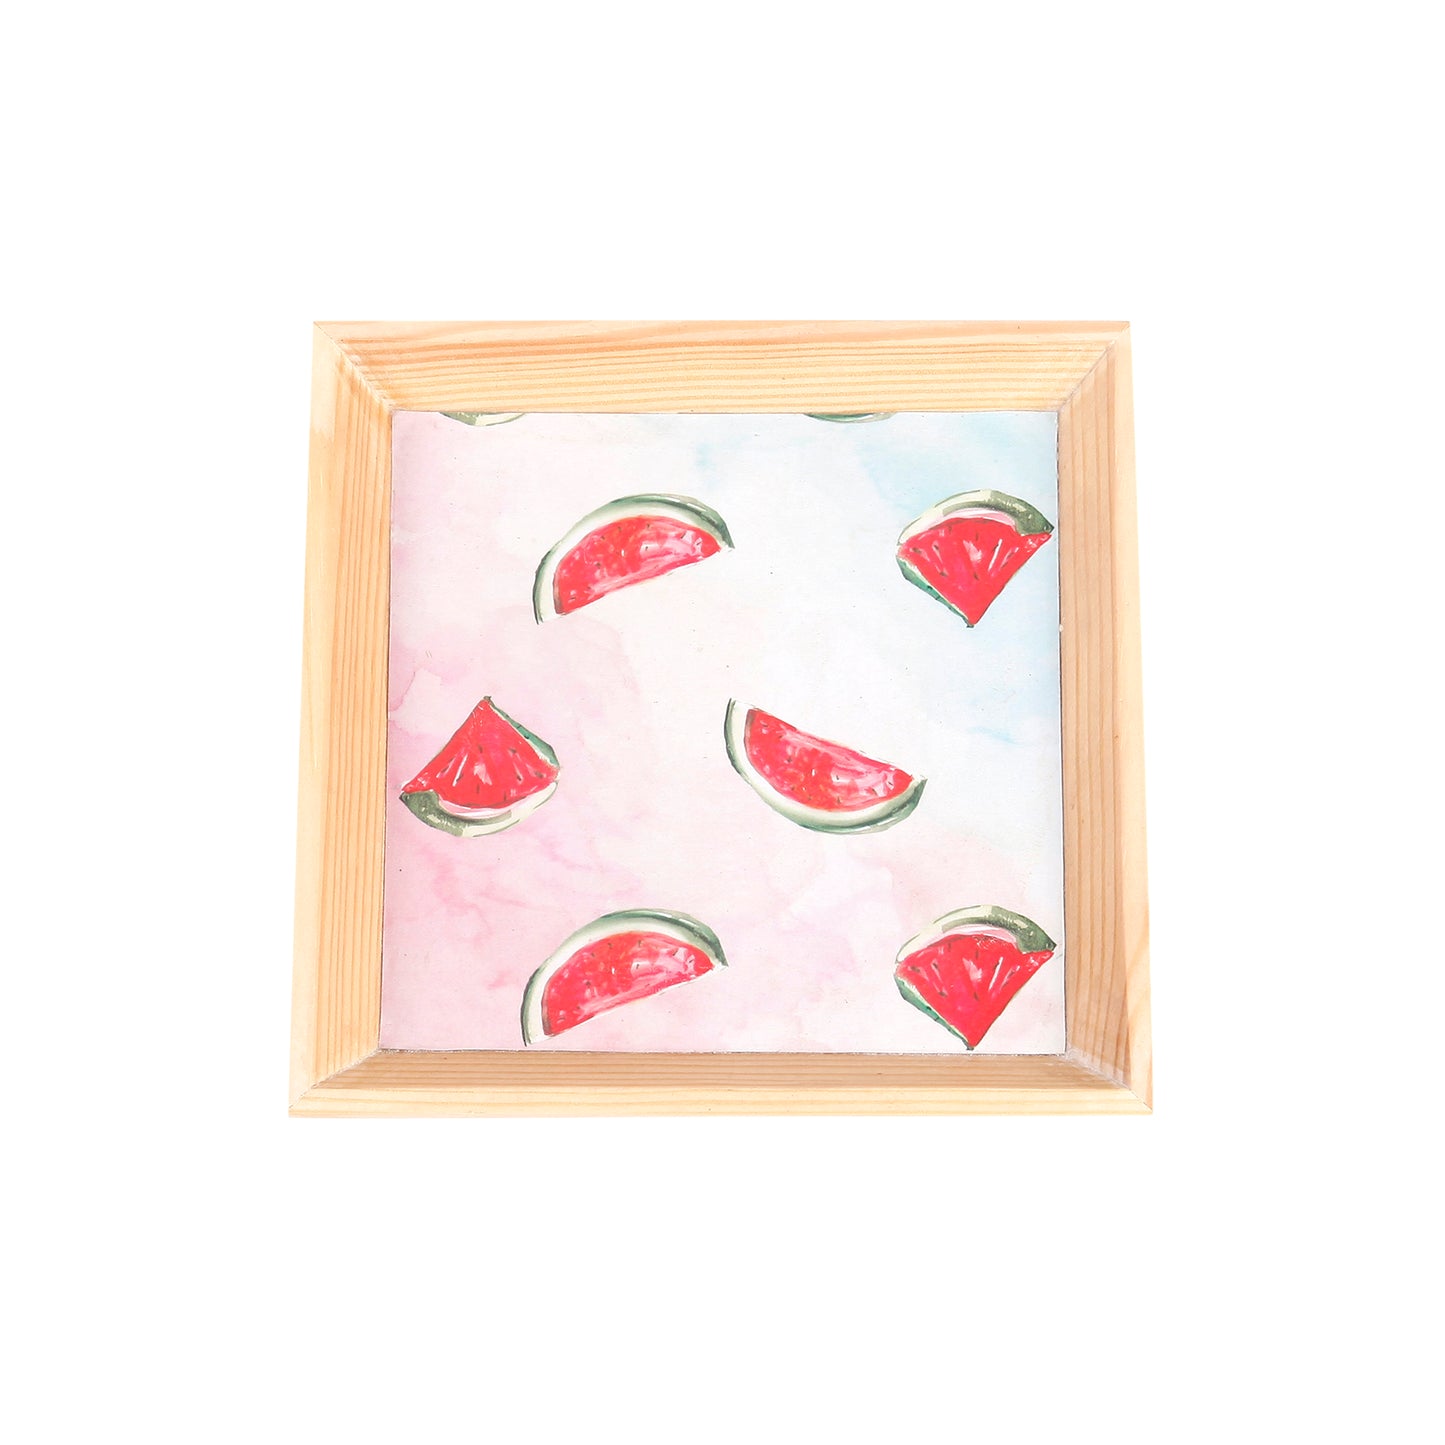 A Tiny Mistake Watermelon Small Square Wooden Serving Tray, 18 x 18 x 2 cm